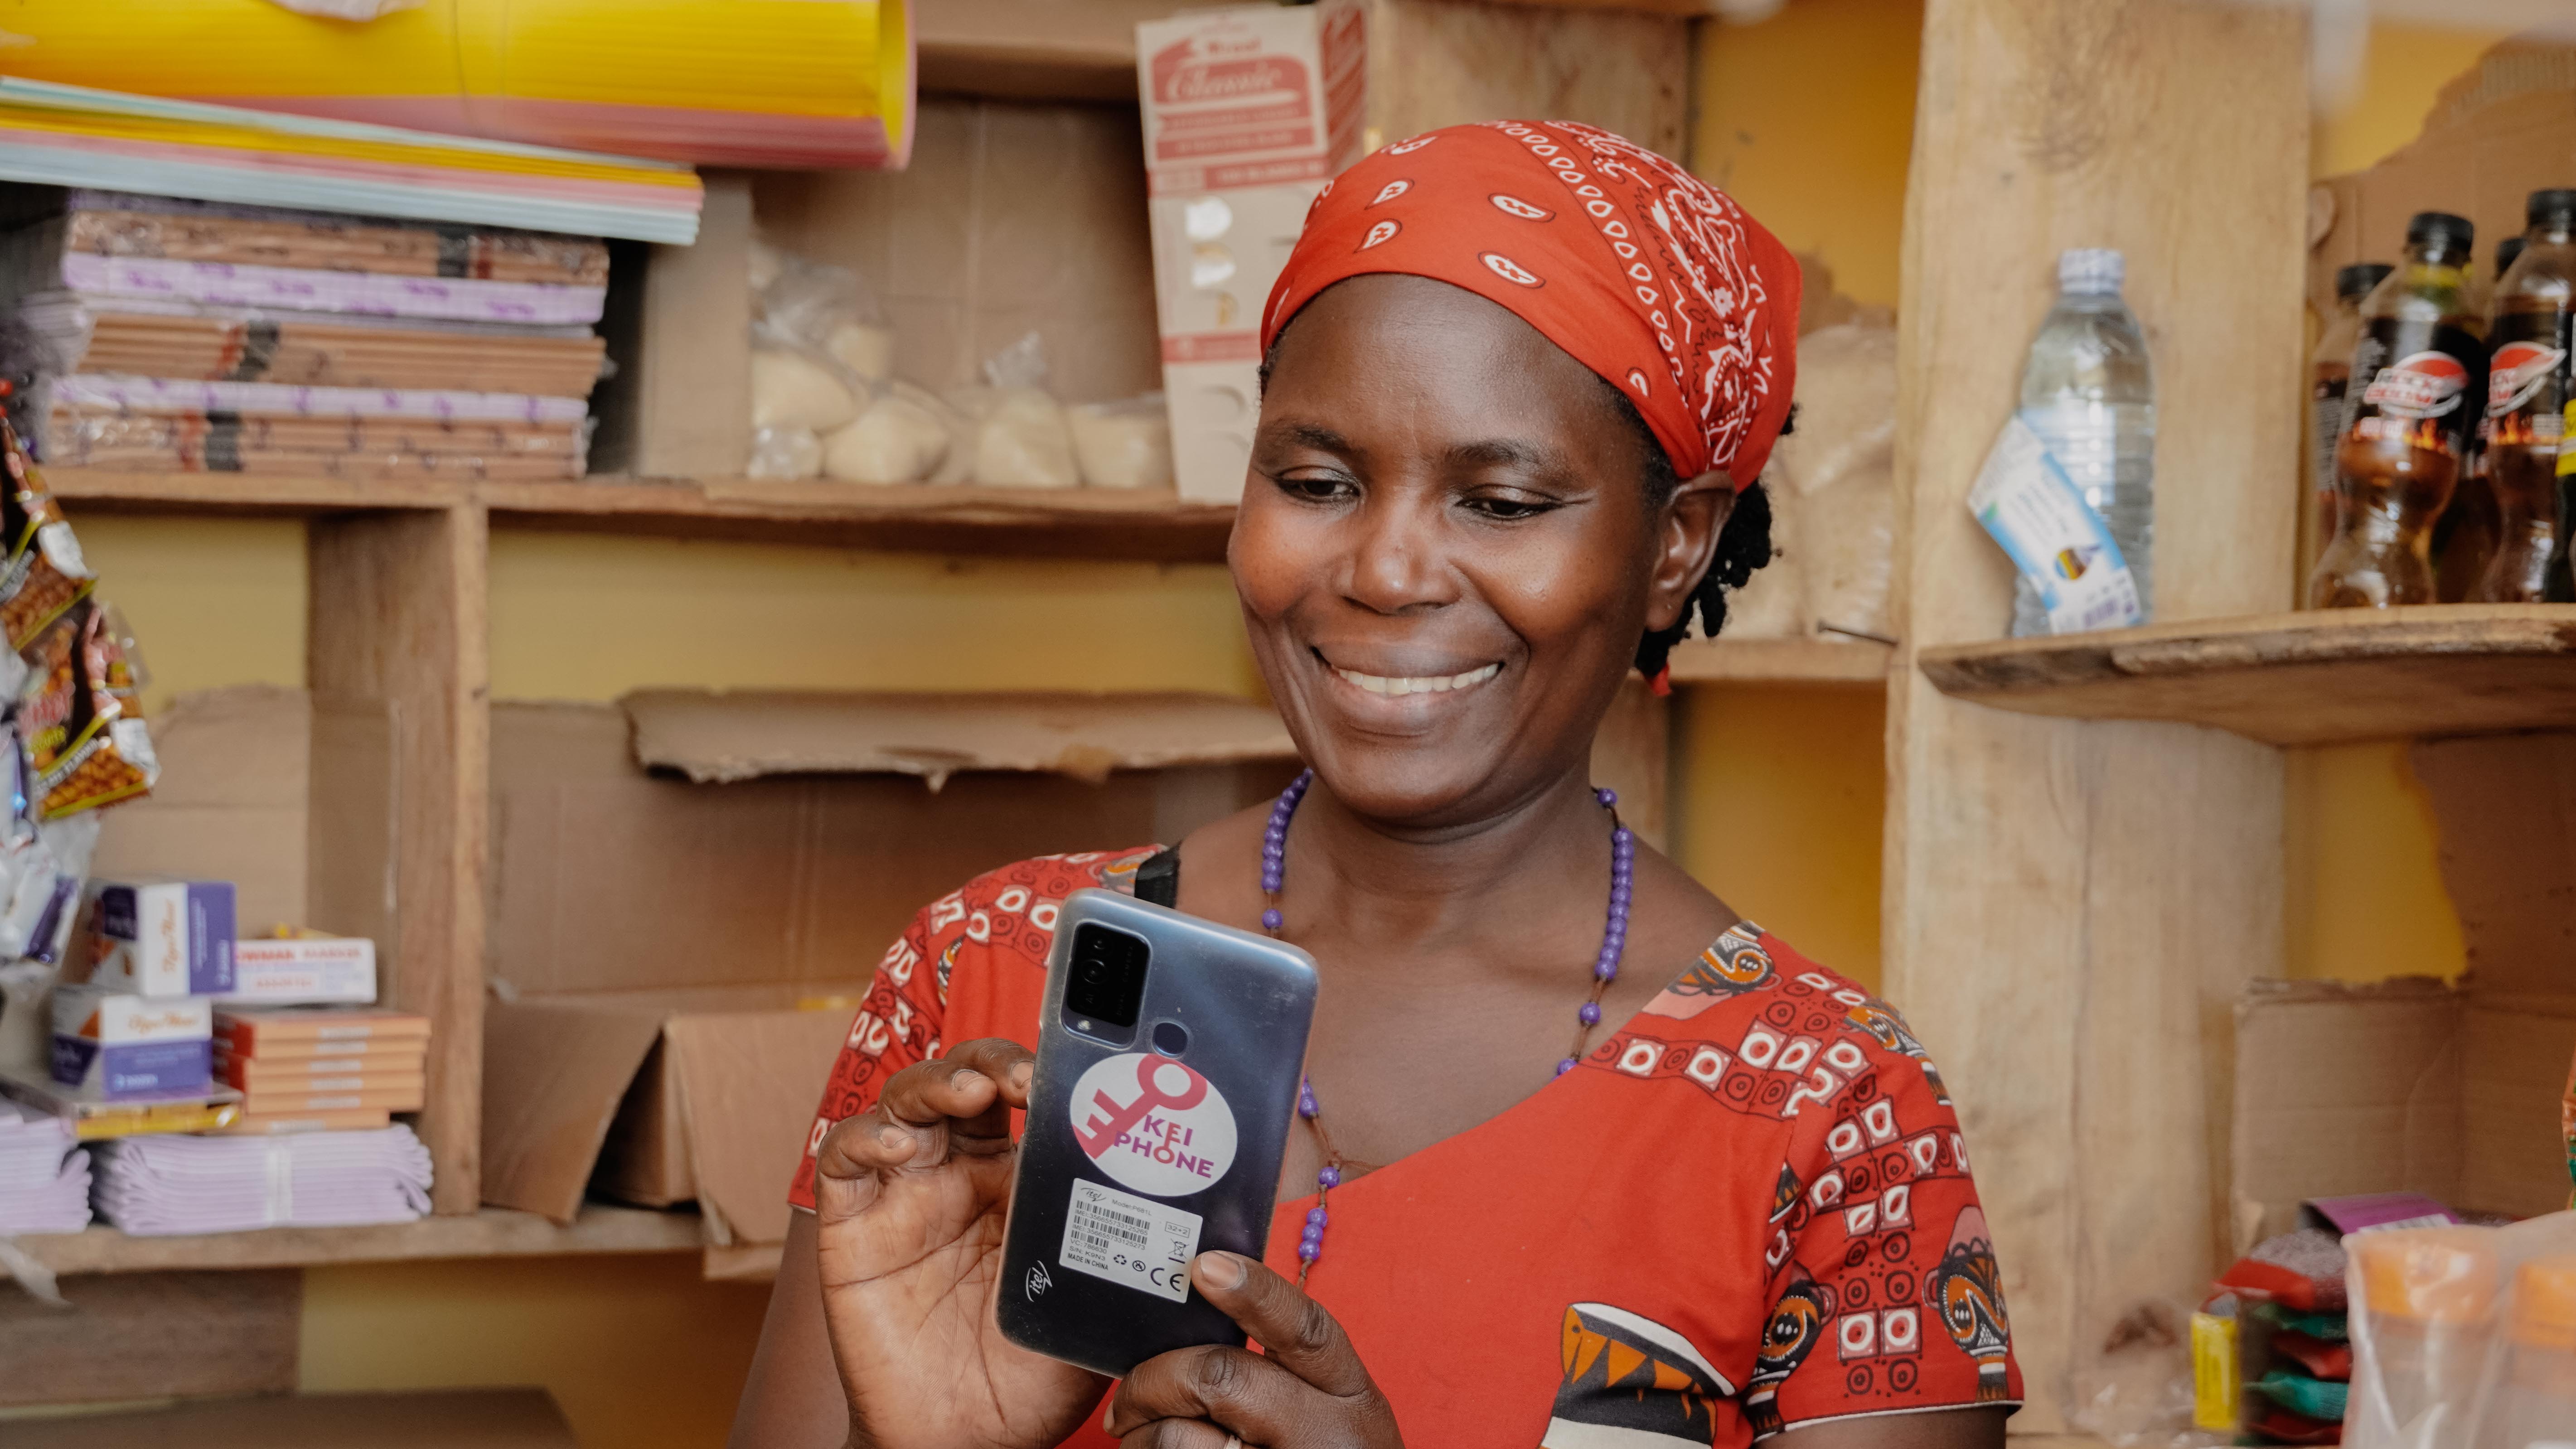 KEIPhone provides wireless access to thousands of women across Africa